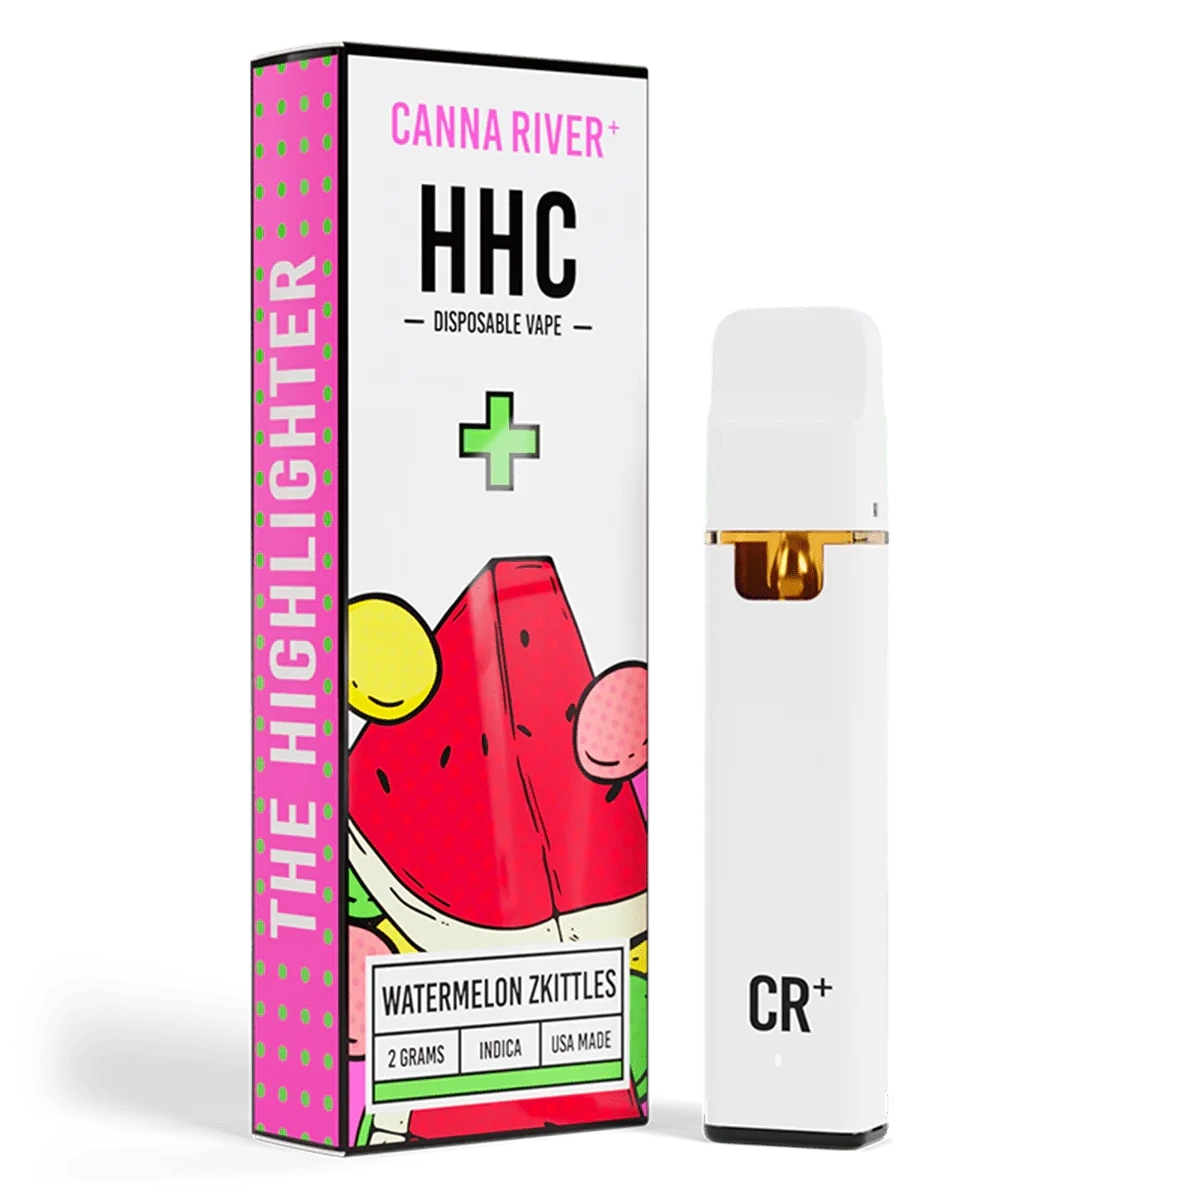 Canna River – HHC – Watermelon Zkittles (Indica) – 2G – Disposable